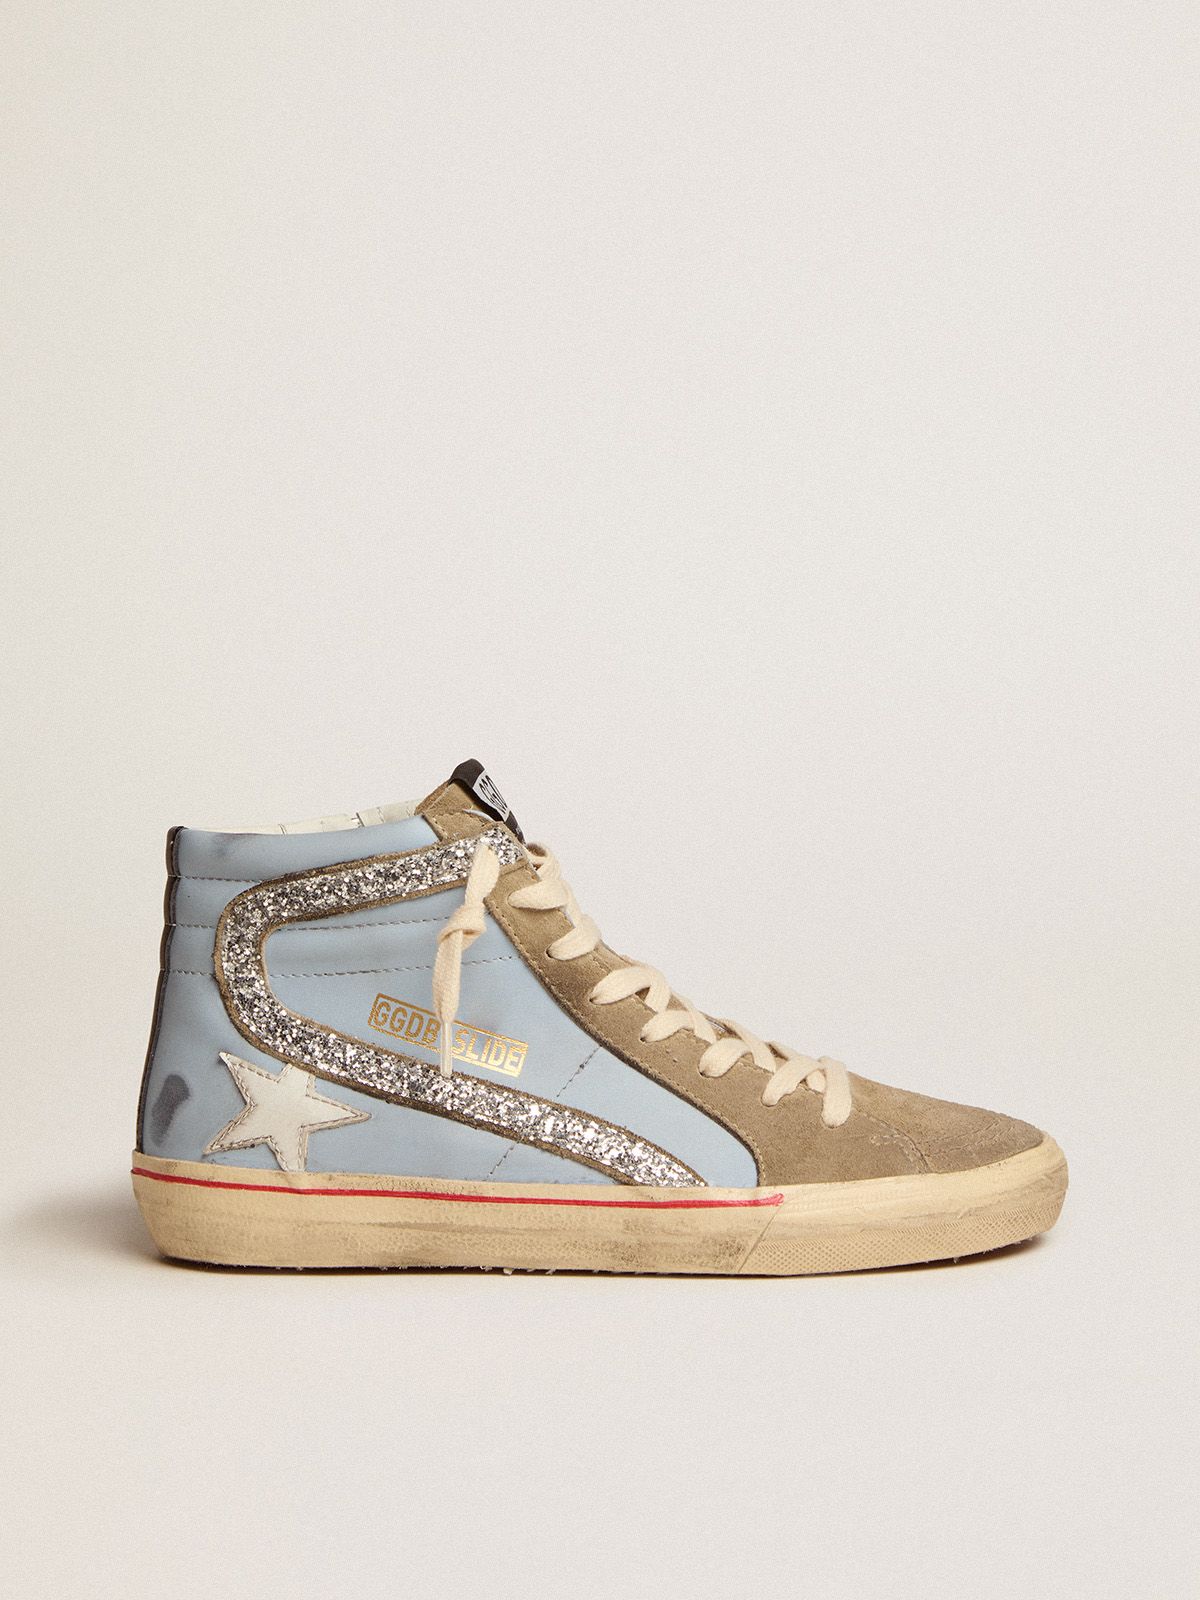 golden goose silver Slide suede dove-gray glitter leather powder-blue in tongue and sneakers flash with